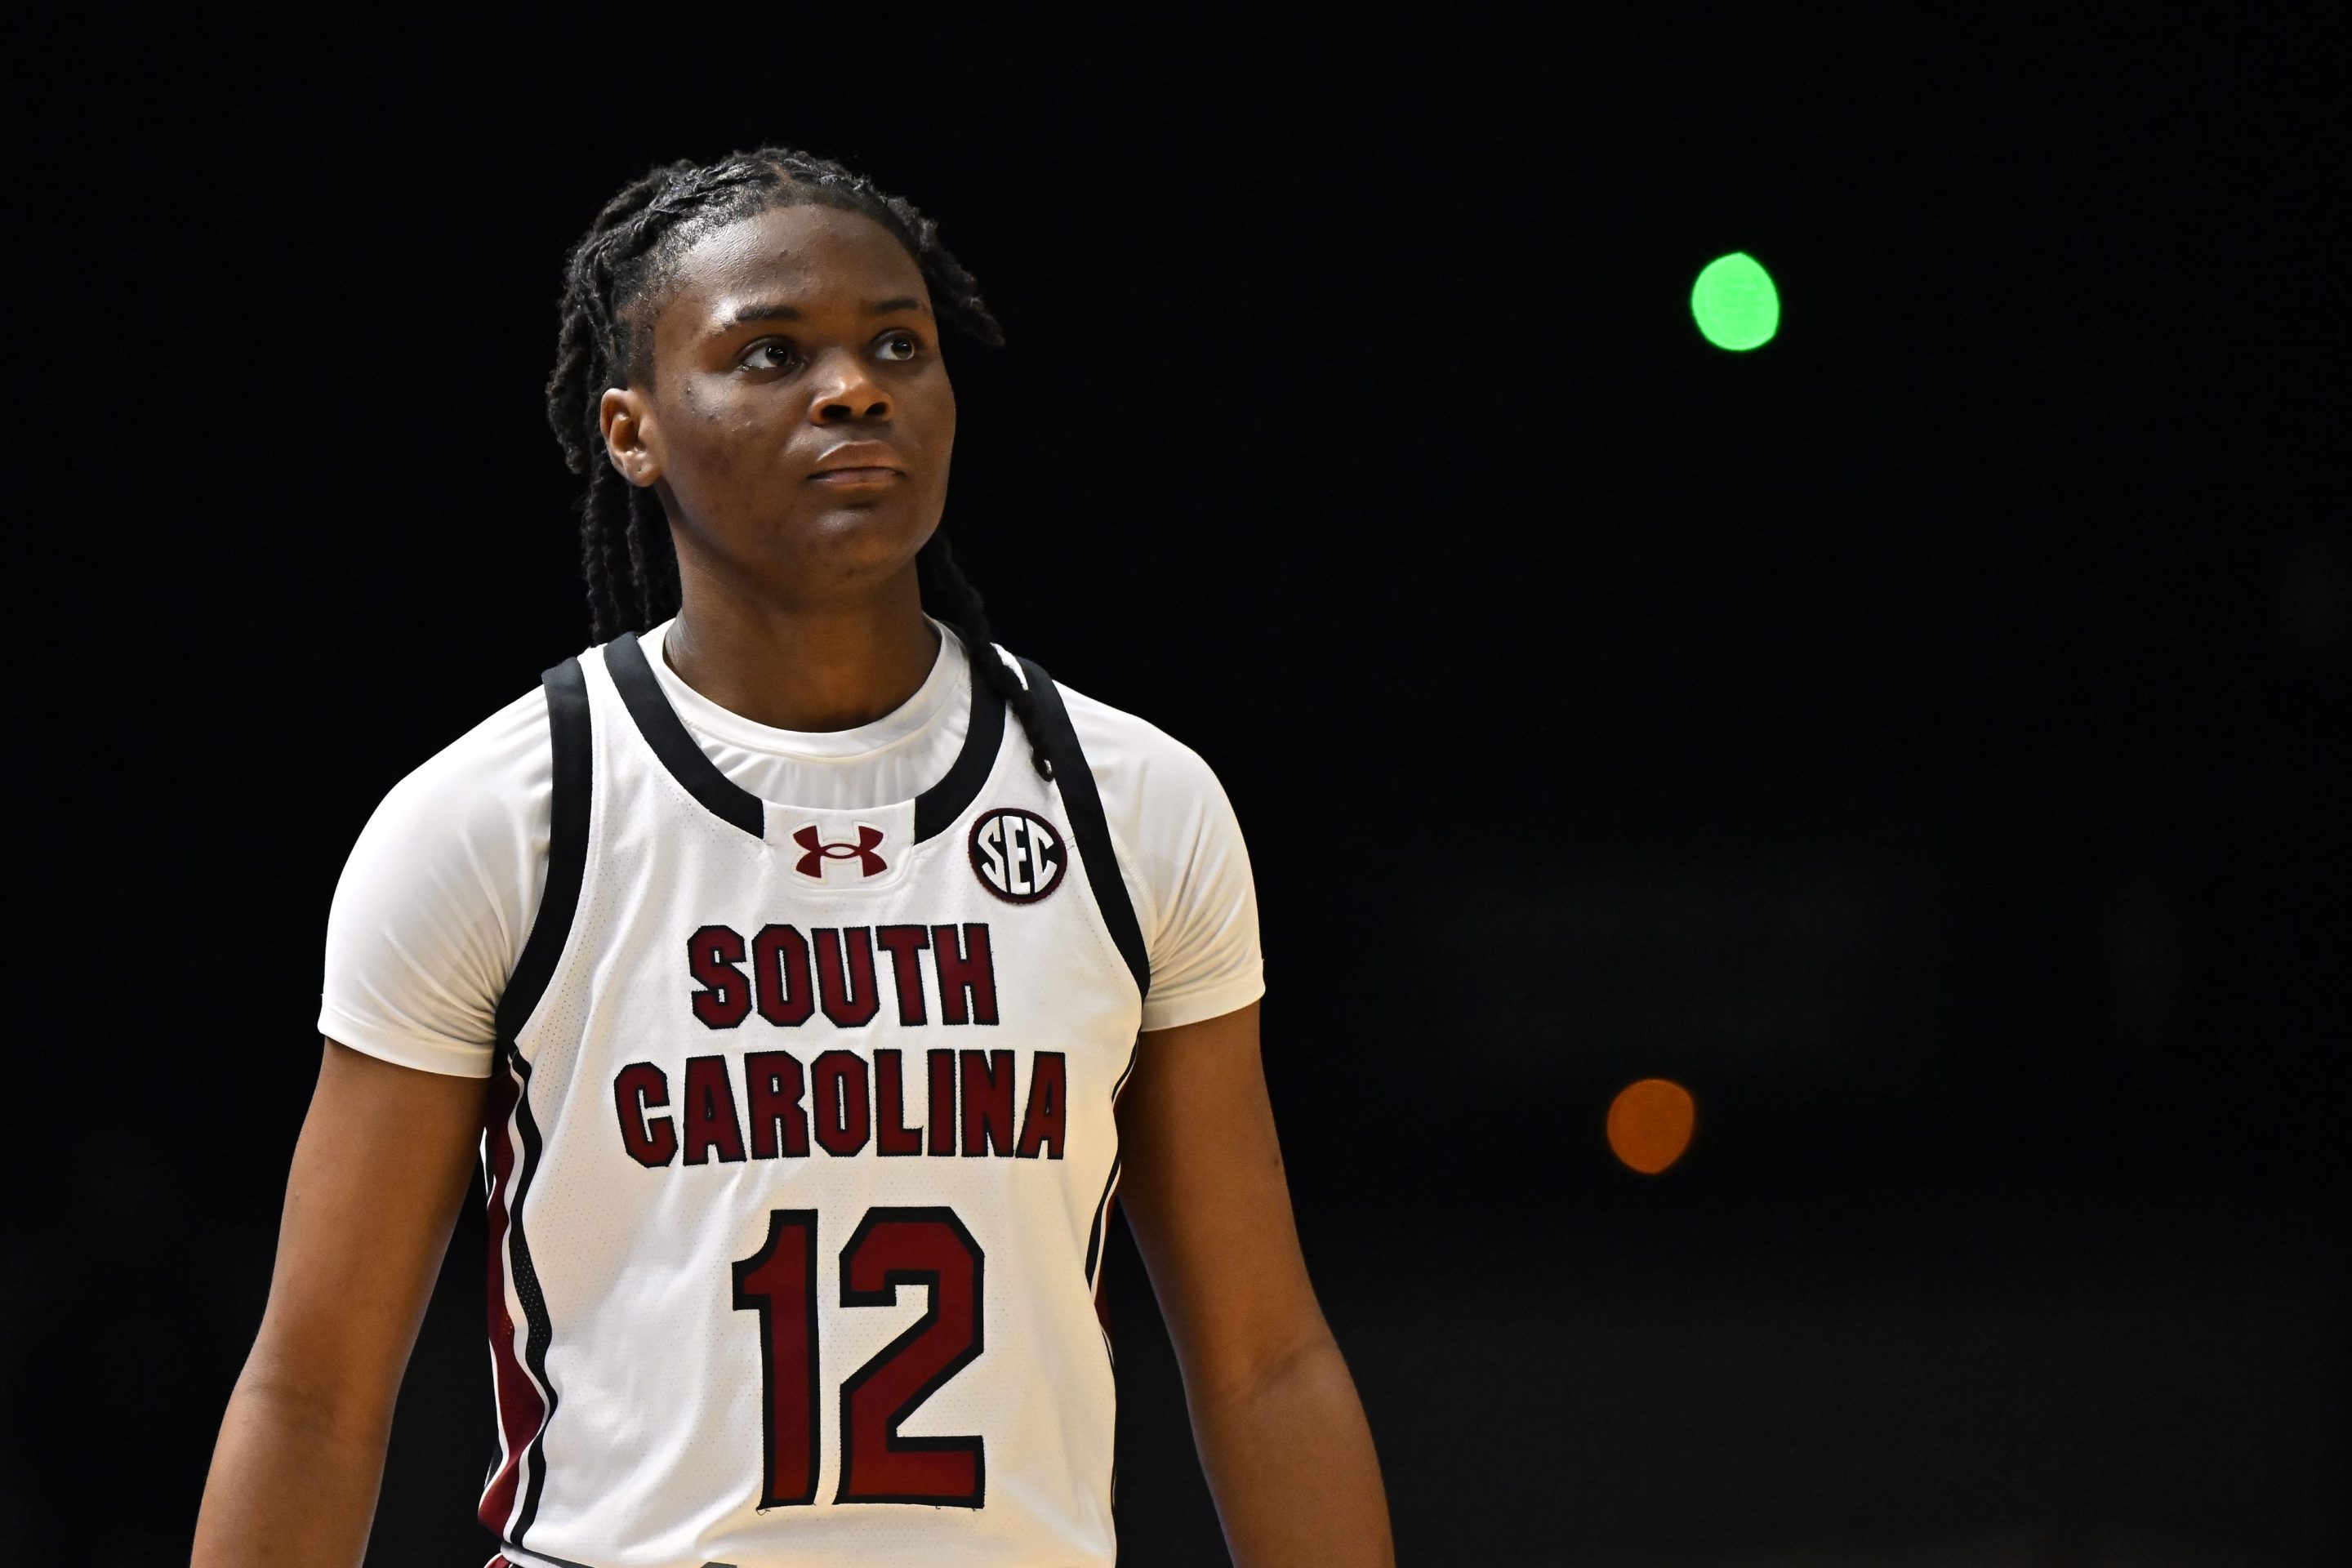 Milaysia Fulwiley of South Carolina looks on during the Aflac Oui Play match between South Carolina and Notre Dame at Halle Georges Carpentier on November 06, 2023 in Paris, France.